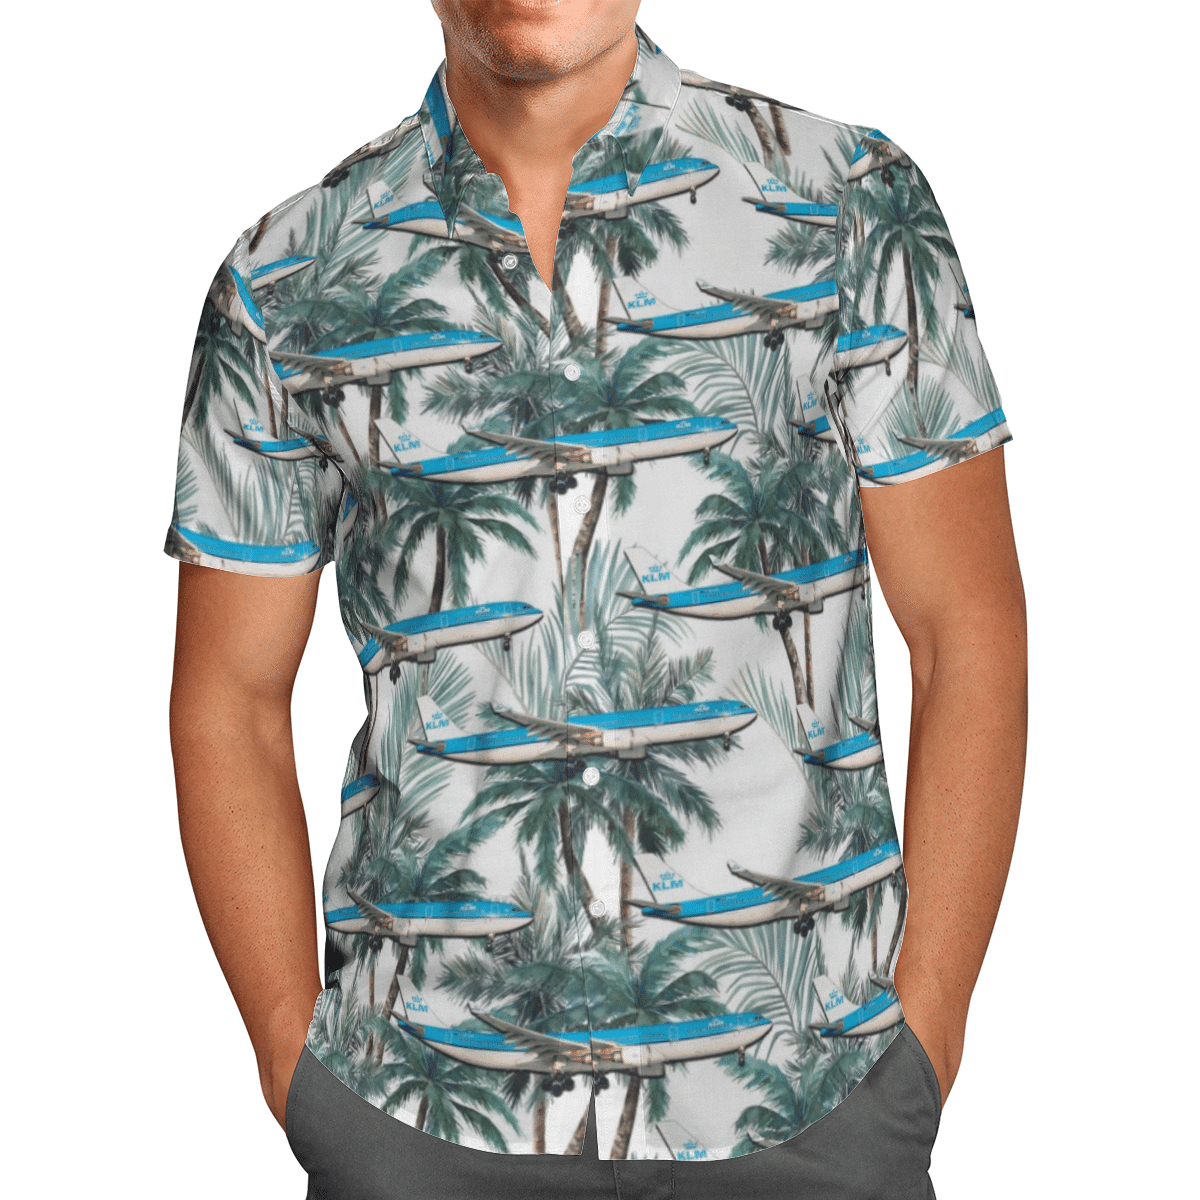 HOT KLM Royal Dutch Airlines Airbus A330-303 All Over Print Tropical Shirt1